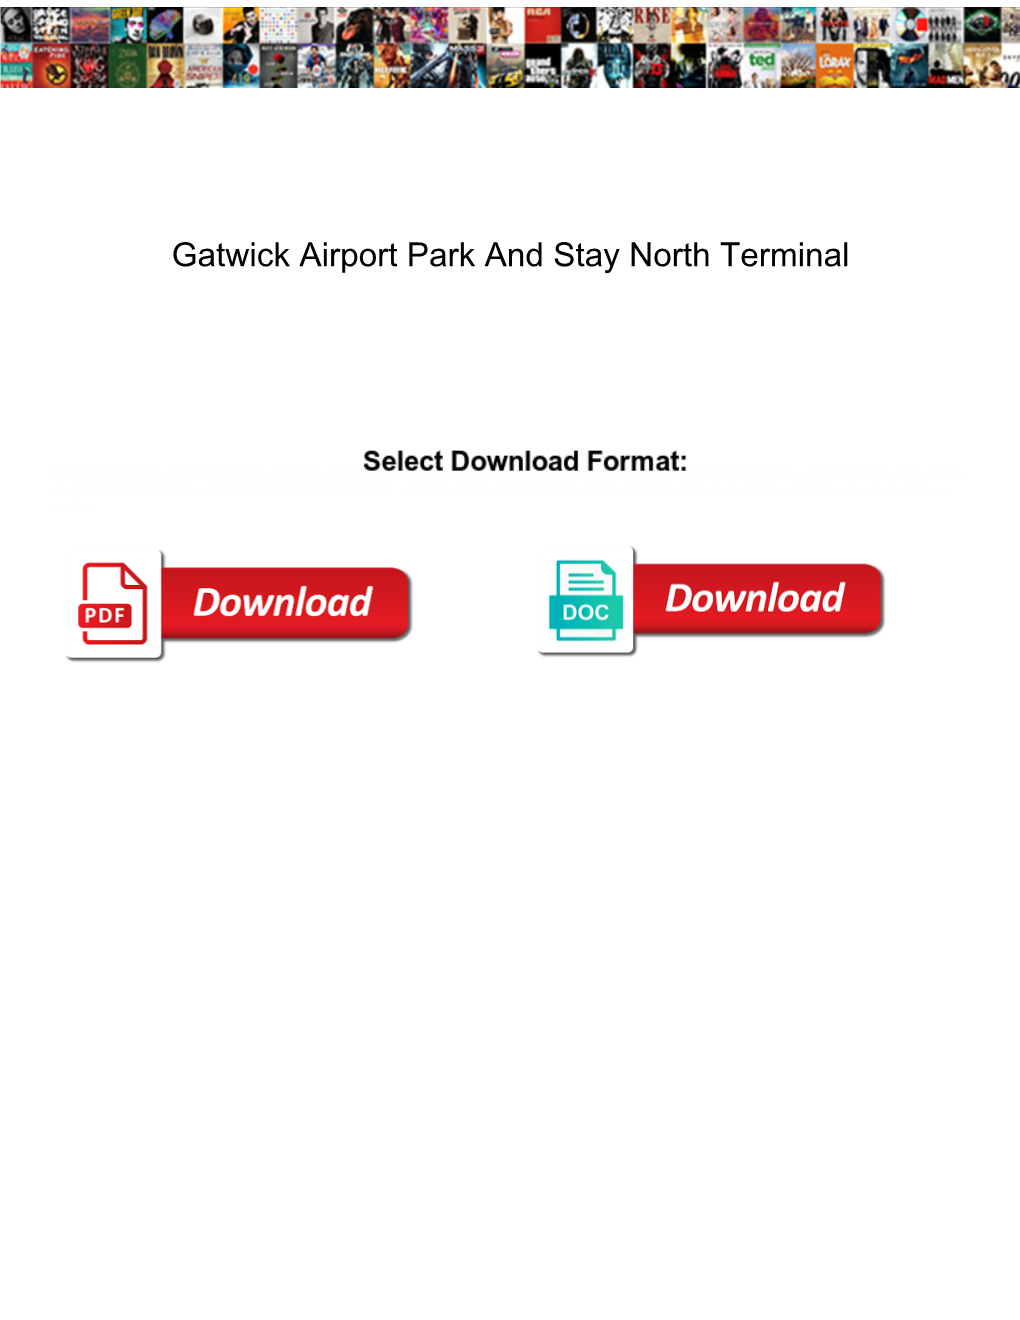 Gatwick Airport Park and Stay North Terminal